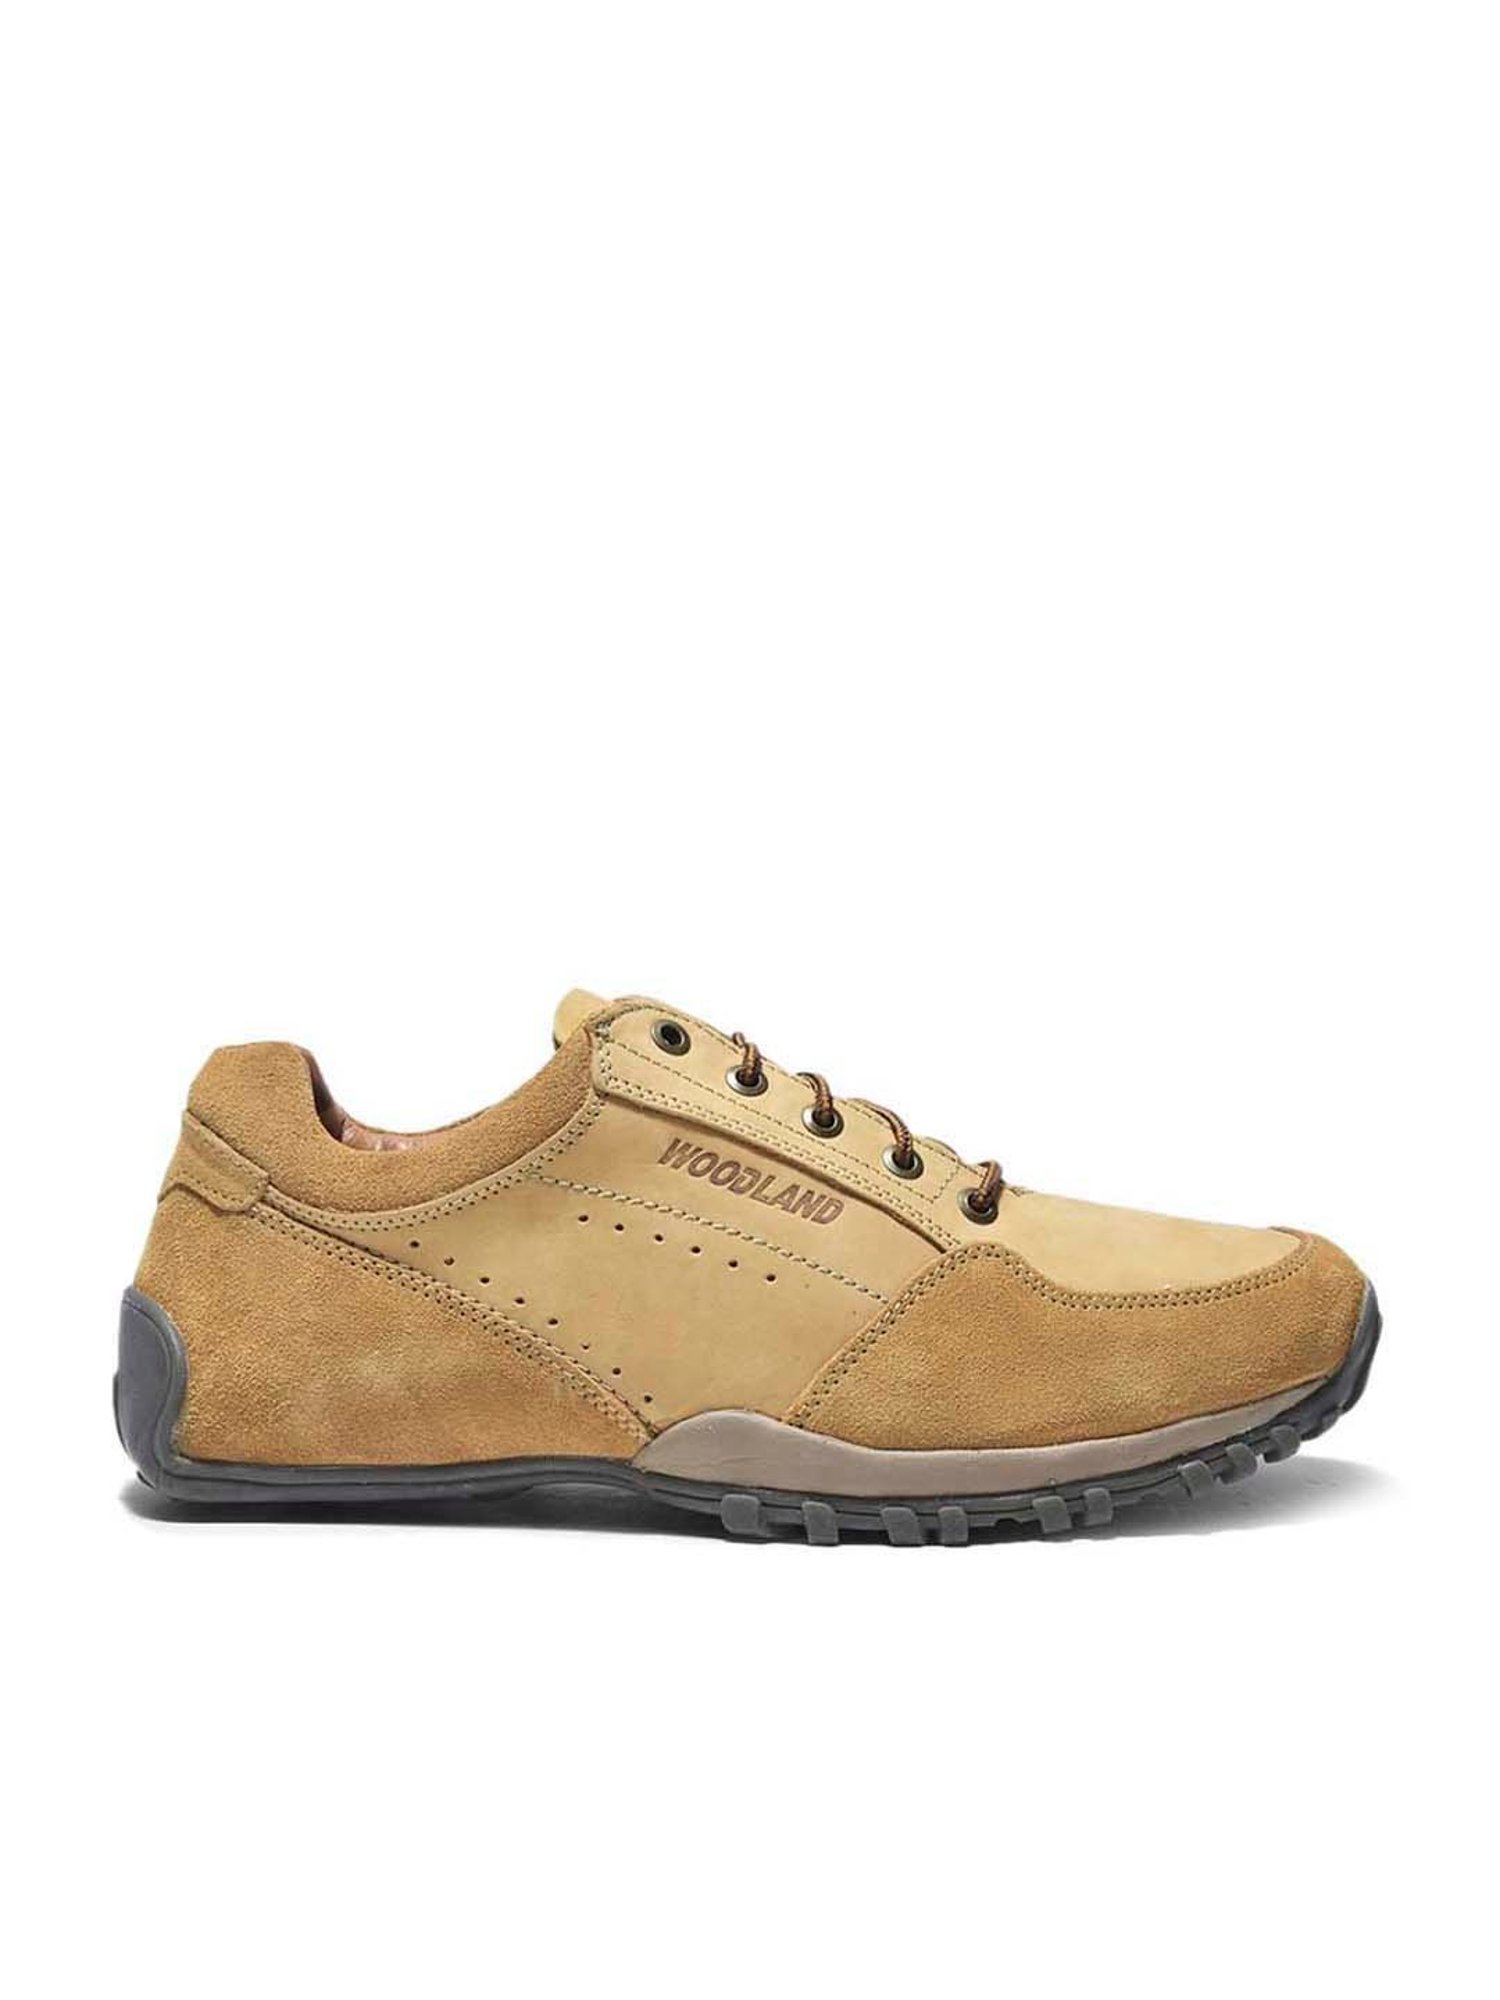 Buy Woodland Men's Tobacco Leather Sneakers - 7 UK/India (41 EU) at  Amazon.in